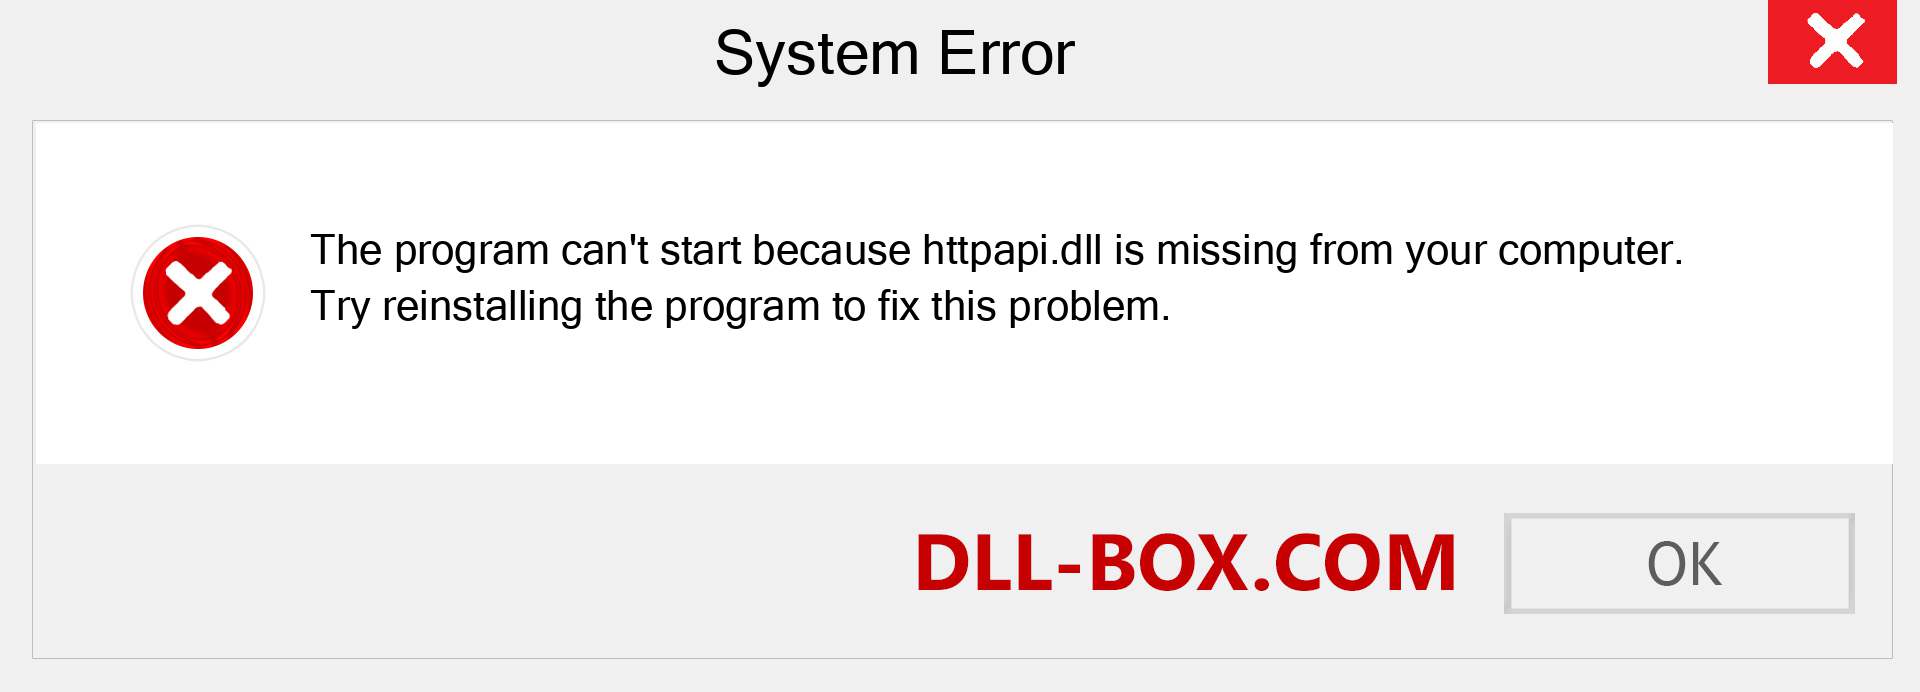  httpapi.dll file is missing?. Download for Windows 7, 8, 10 - Fix  httpapi dll Missing Error on Windows, photos, images